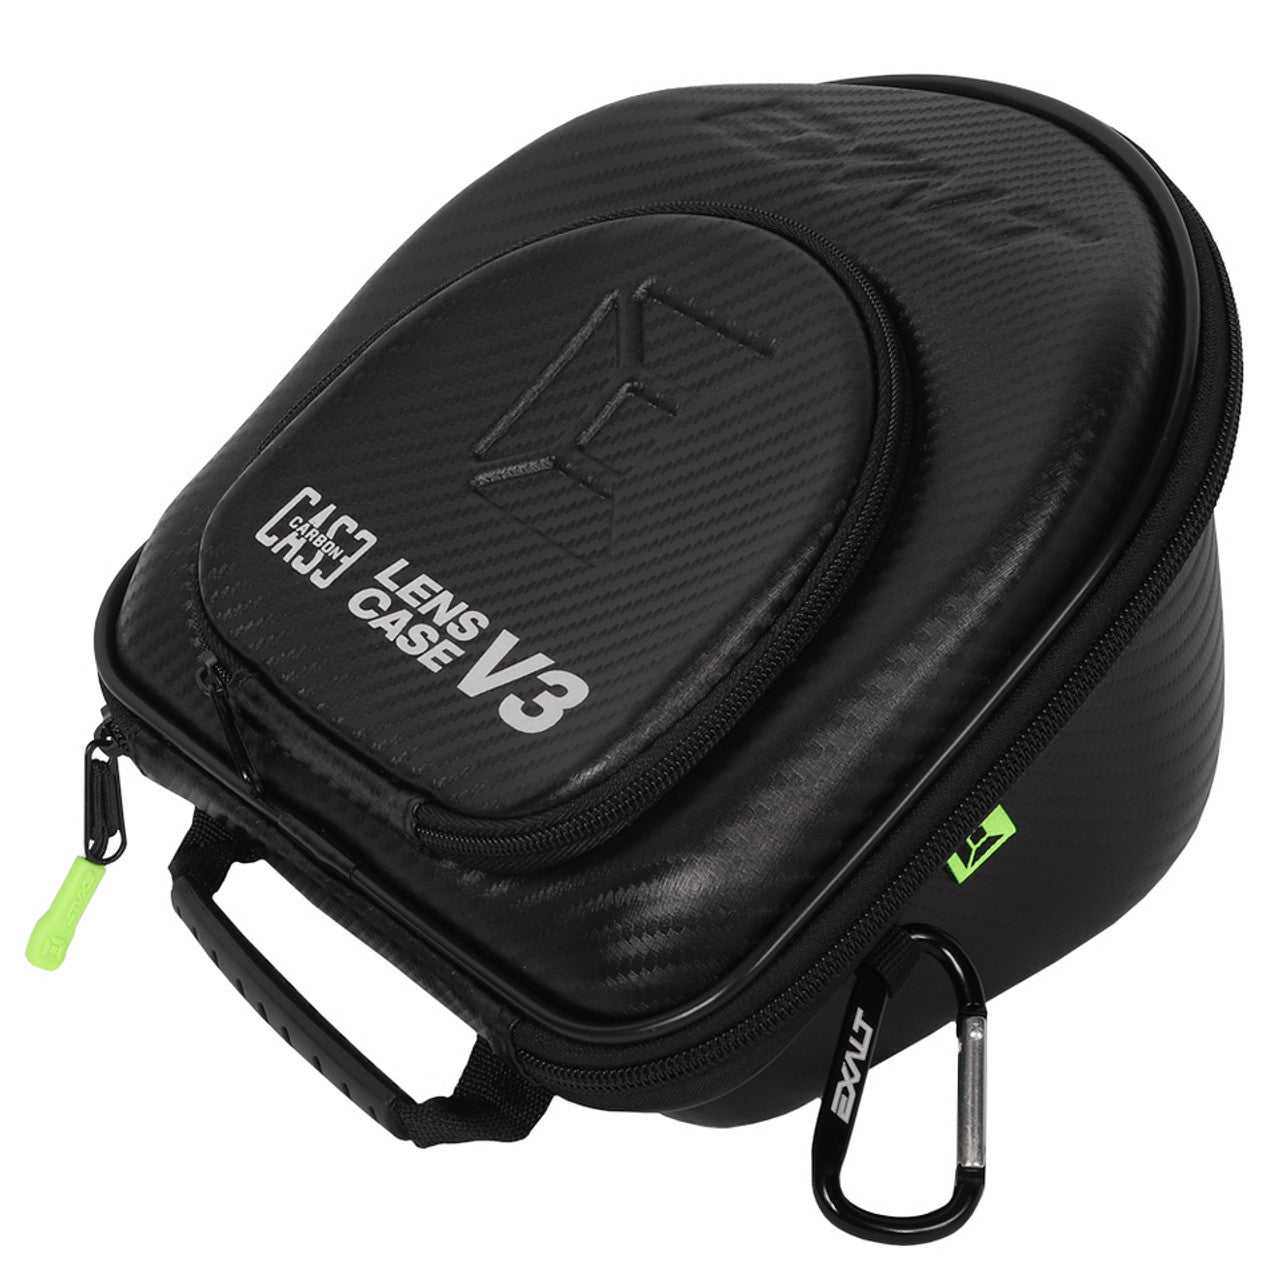 The Exalt V3 Lens case is a one size fits all universal case that allows you to keep your Paintball Mask Lens safe.